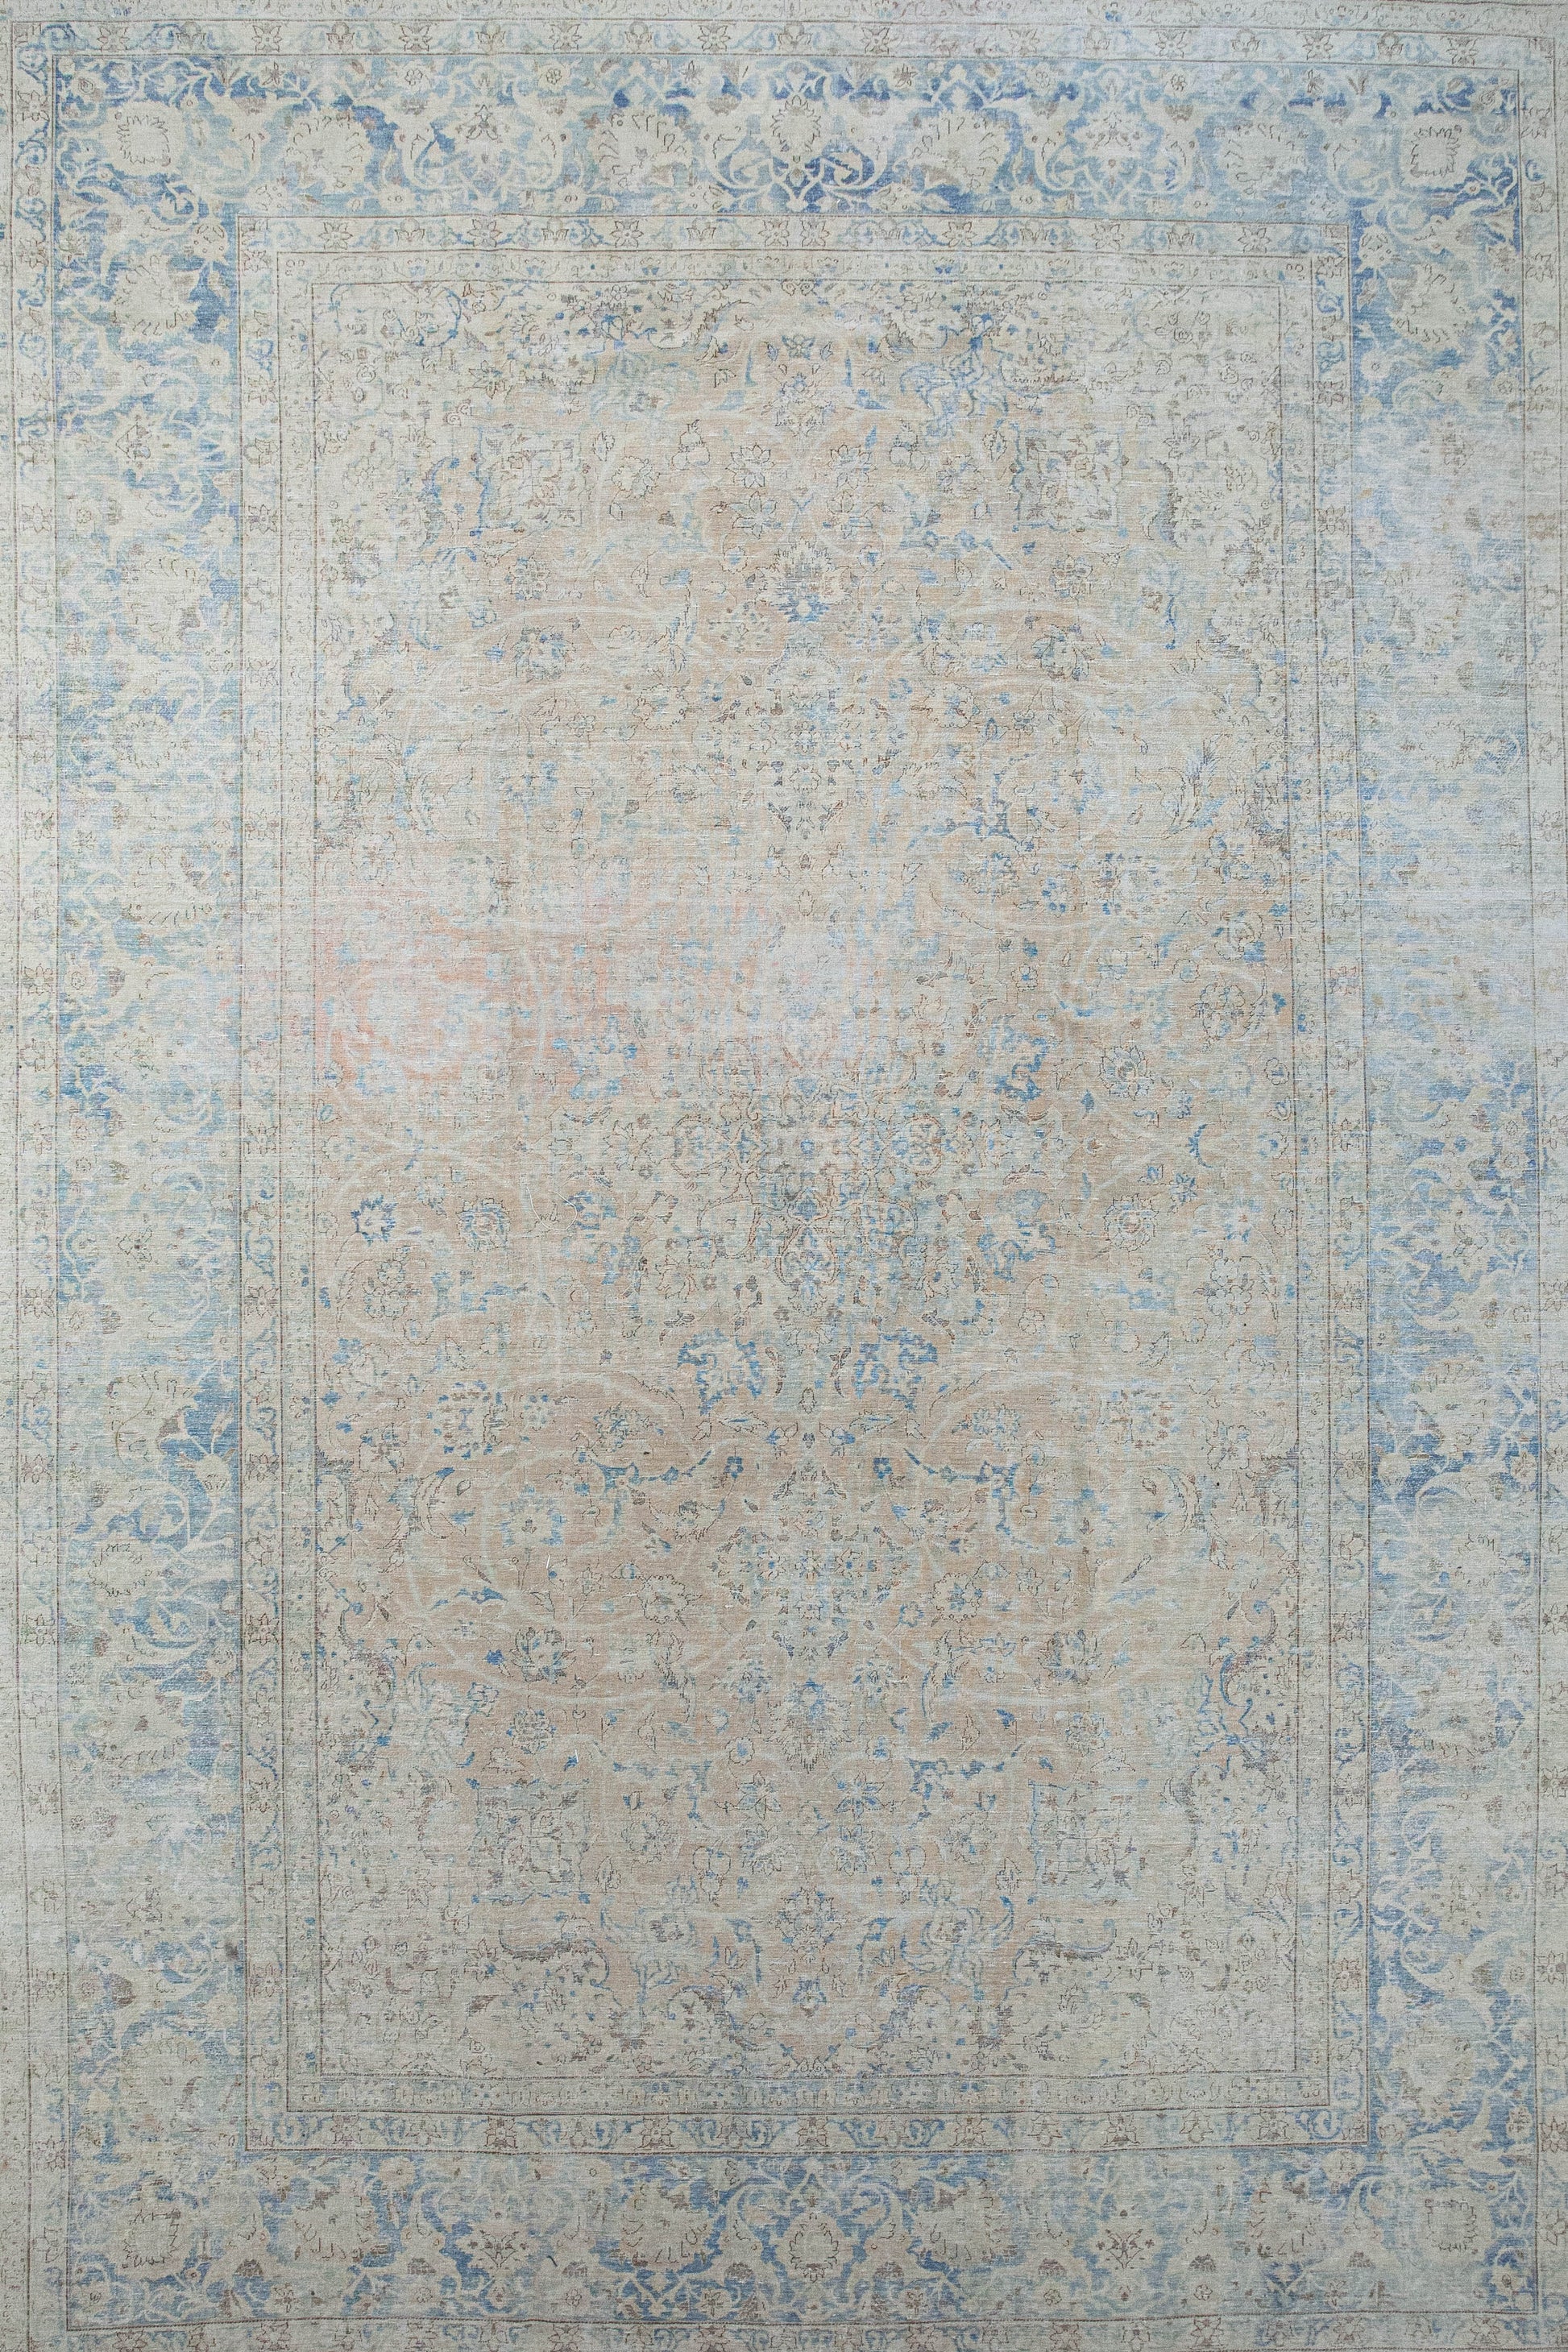 Vintage rug with a distressed finish and a climbing plant pattern with a light royal blue frame.